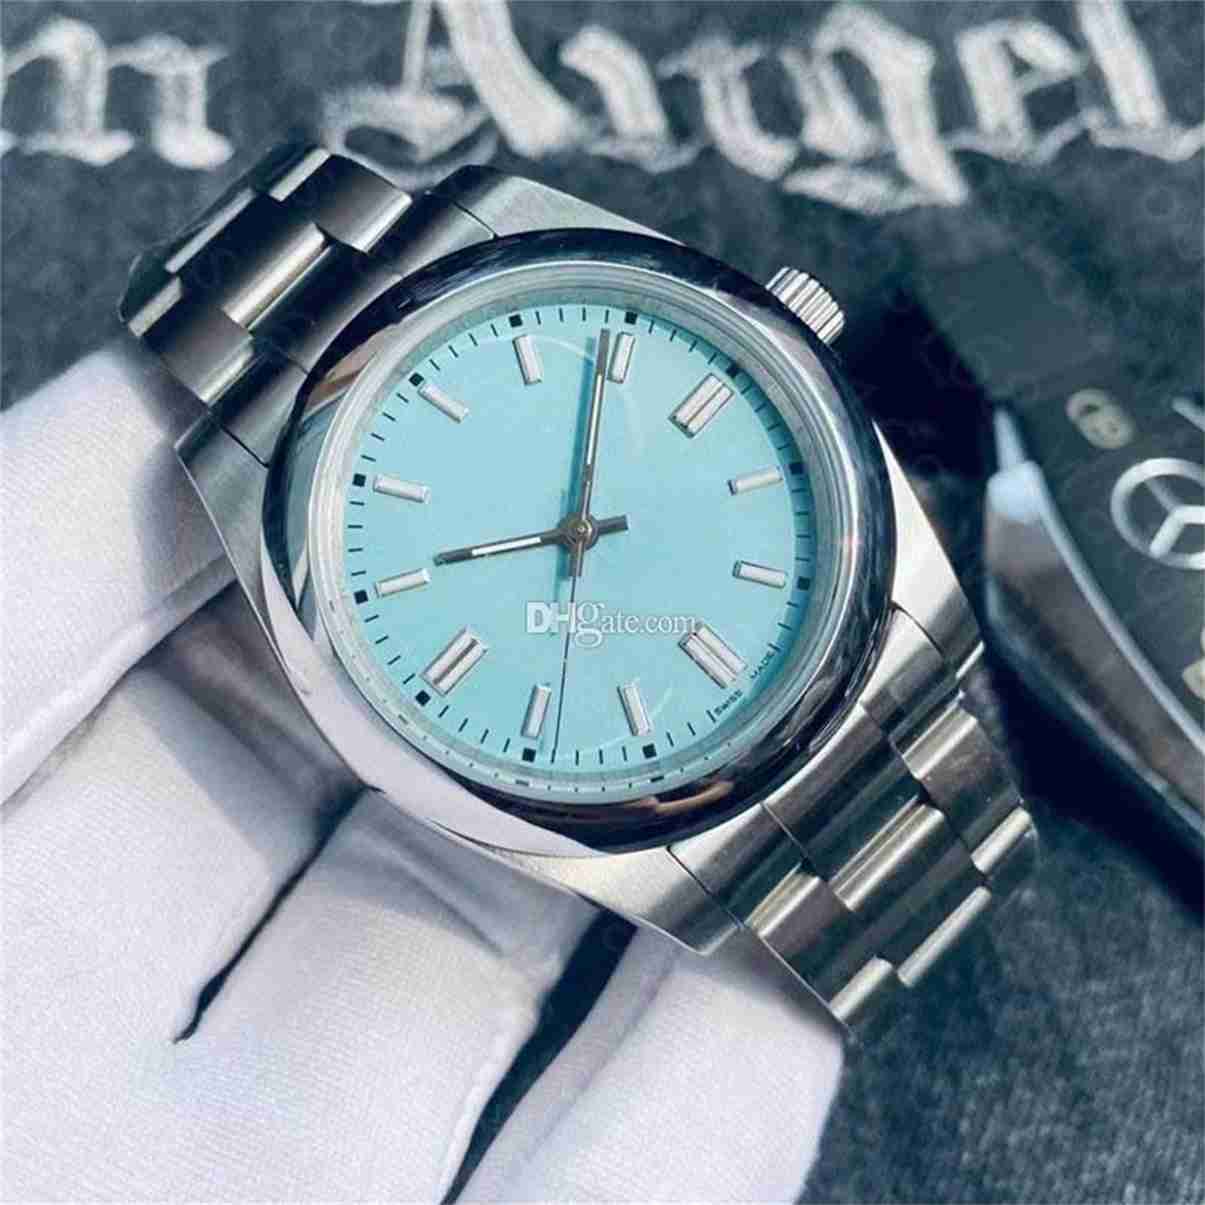 

watch mens designer watche high quality automatic mechanical date just oyster perpetual stainless steel strap 41 36 31mm waterproof wristwatch Luxury watch u1, Box 2